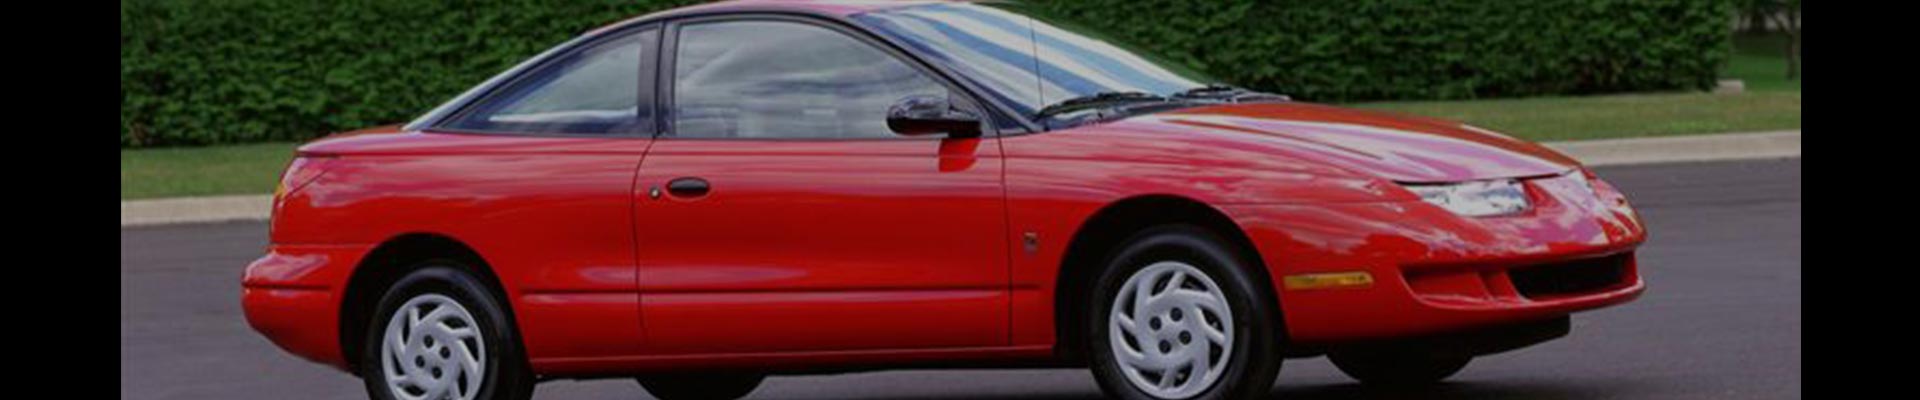 Shop Replacement and OEM 1991 Saturn SC Parts with Discounted Price on the Net